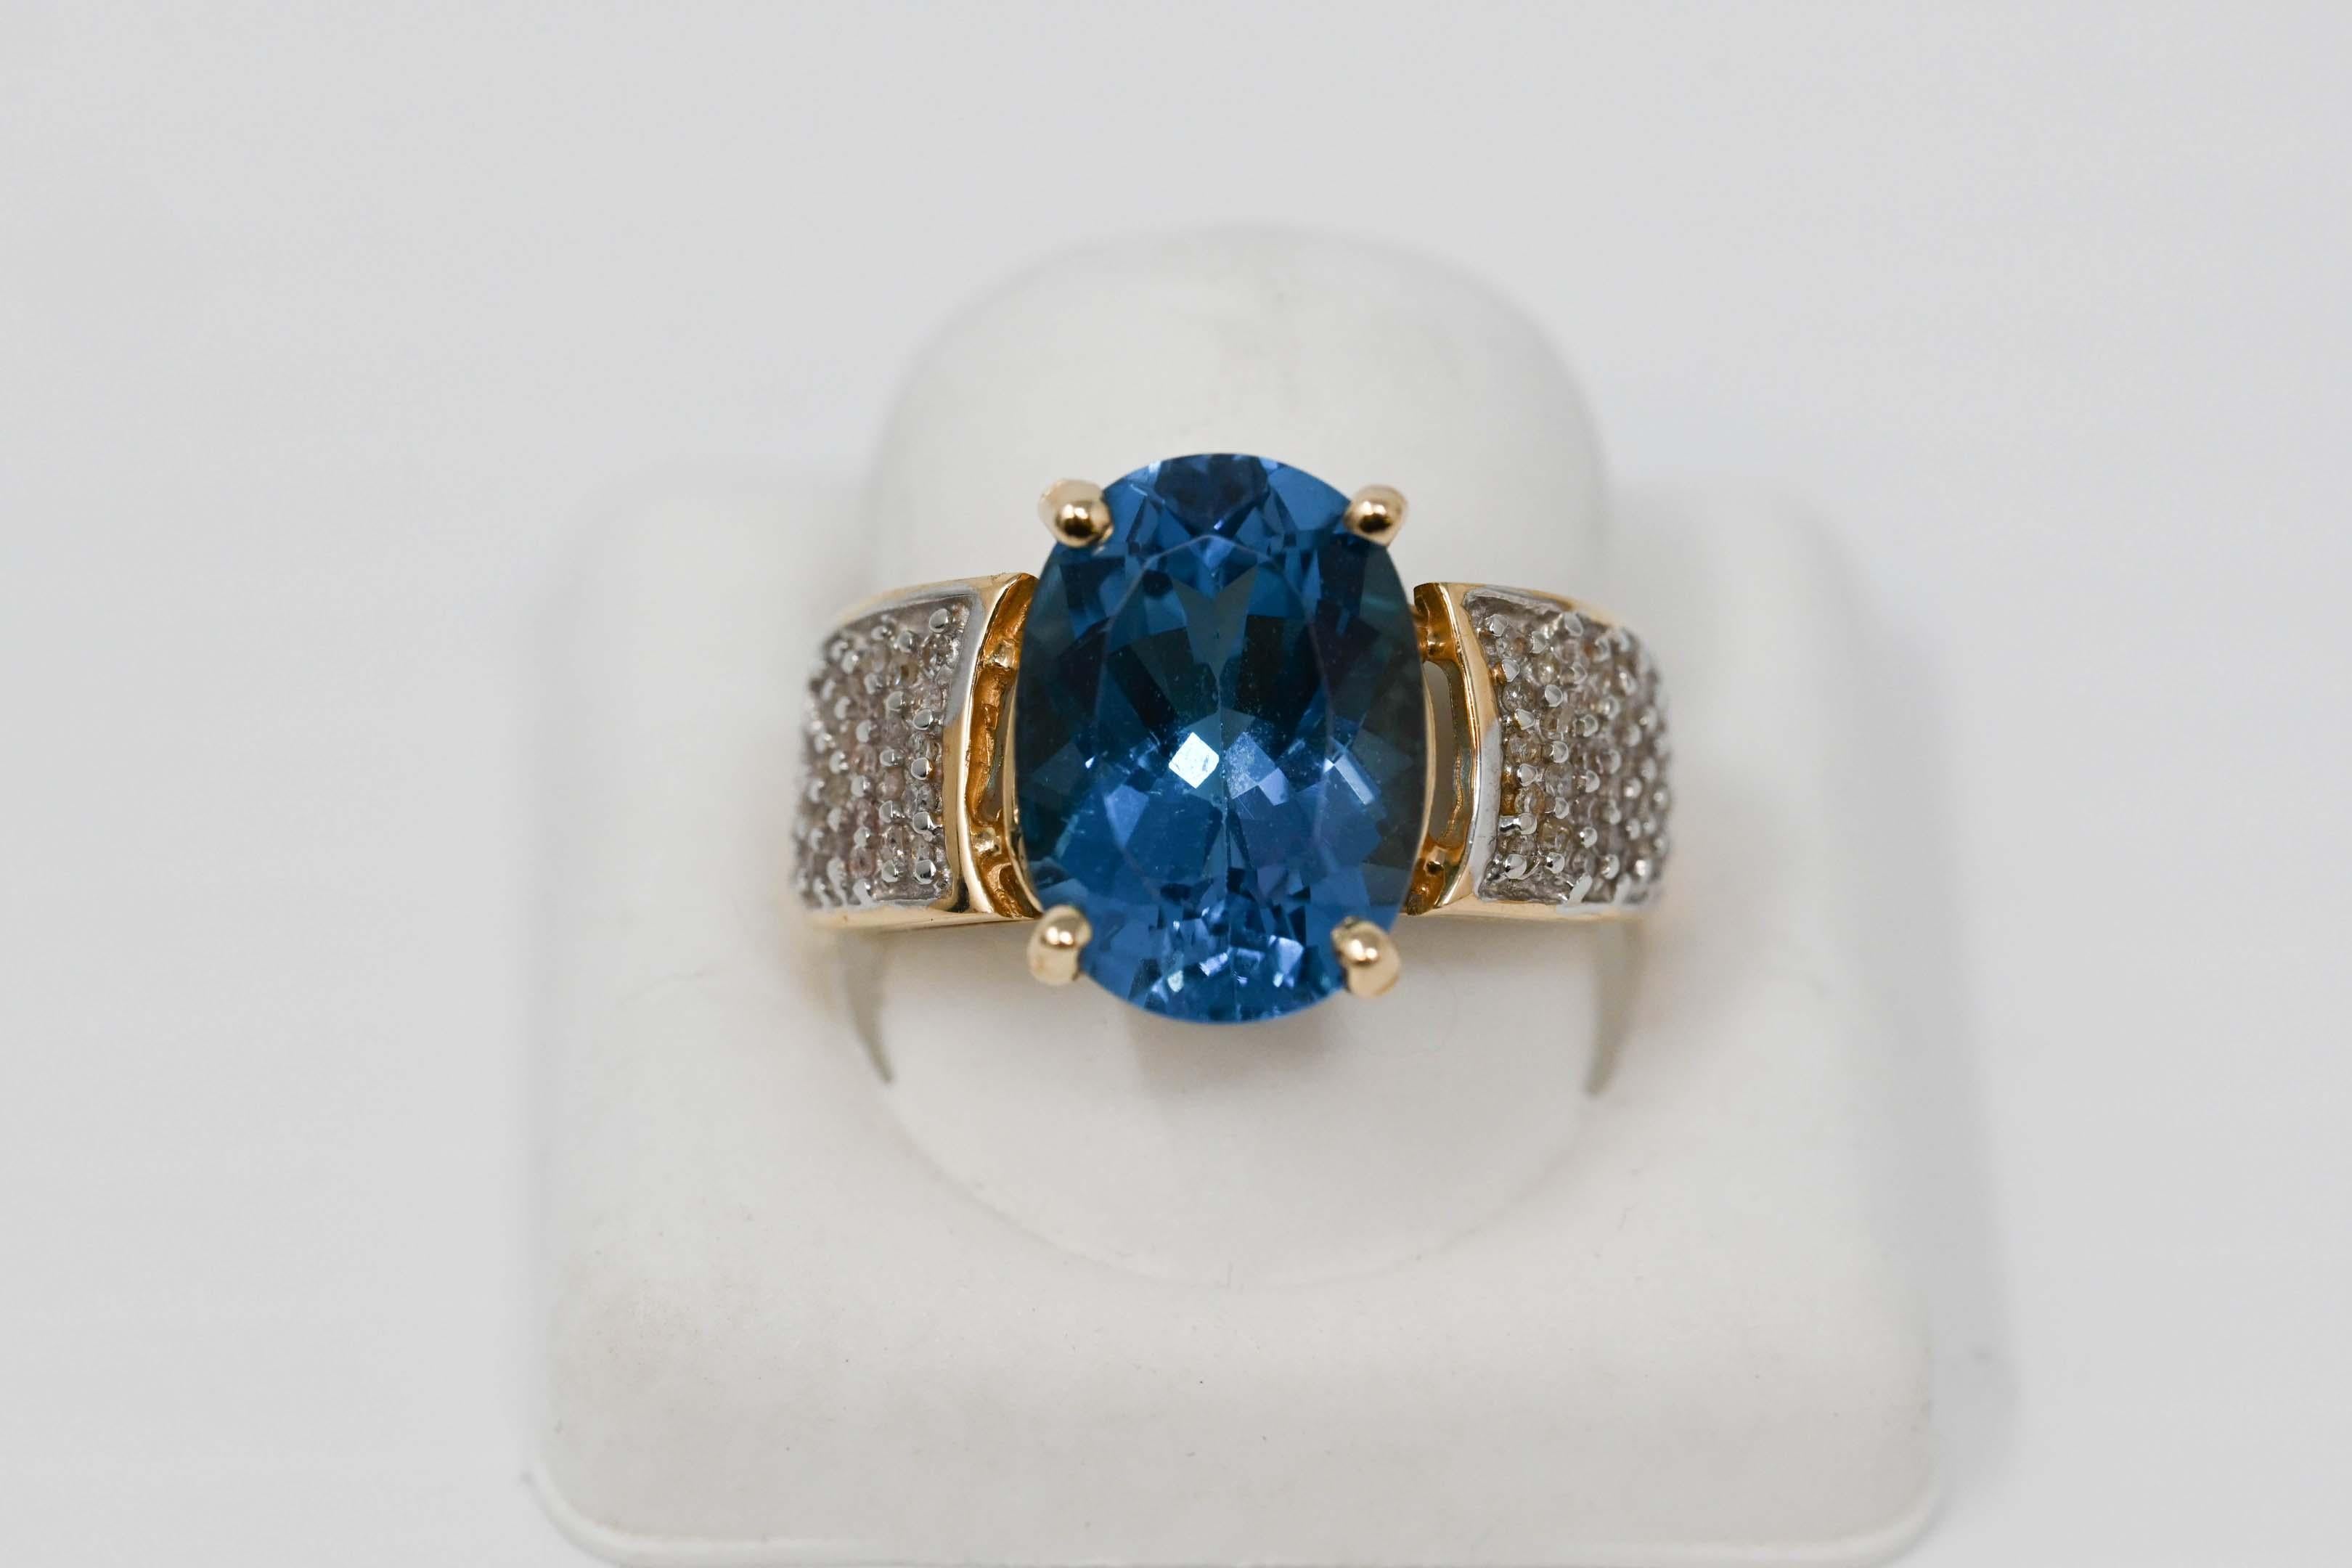 14k gold ladies ring set with a iolite gemstone 14 x 11 mm and 78 genuine diamond stones. Size 8, stamped 14k inside, maker mark unknown. Weighs 7.7 grams.
